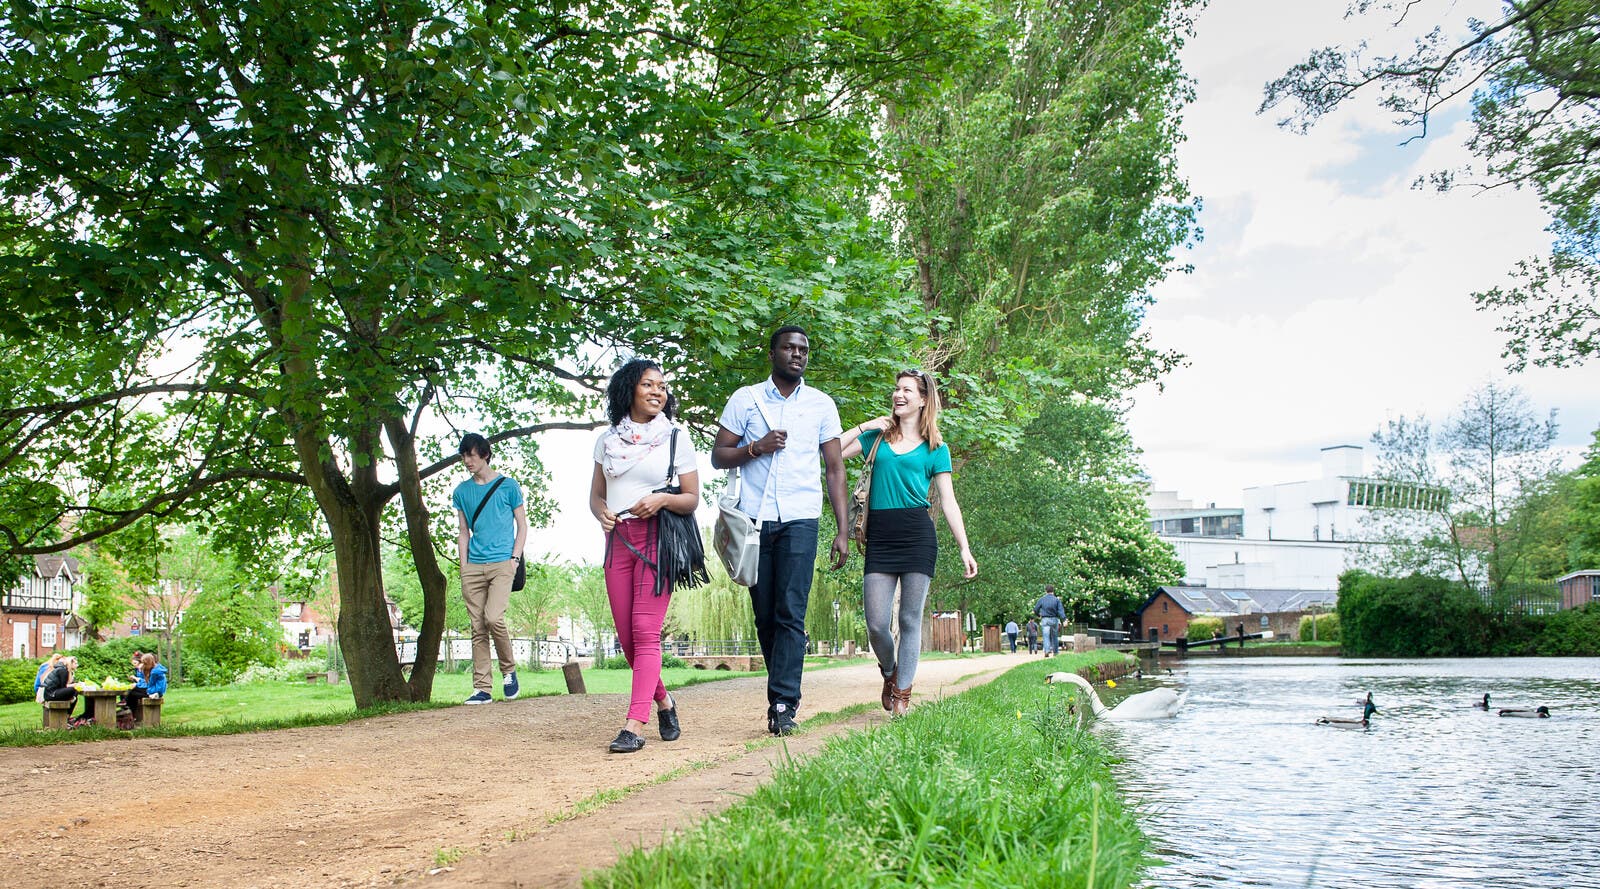 Students walking by canal in Surrey